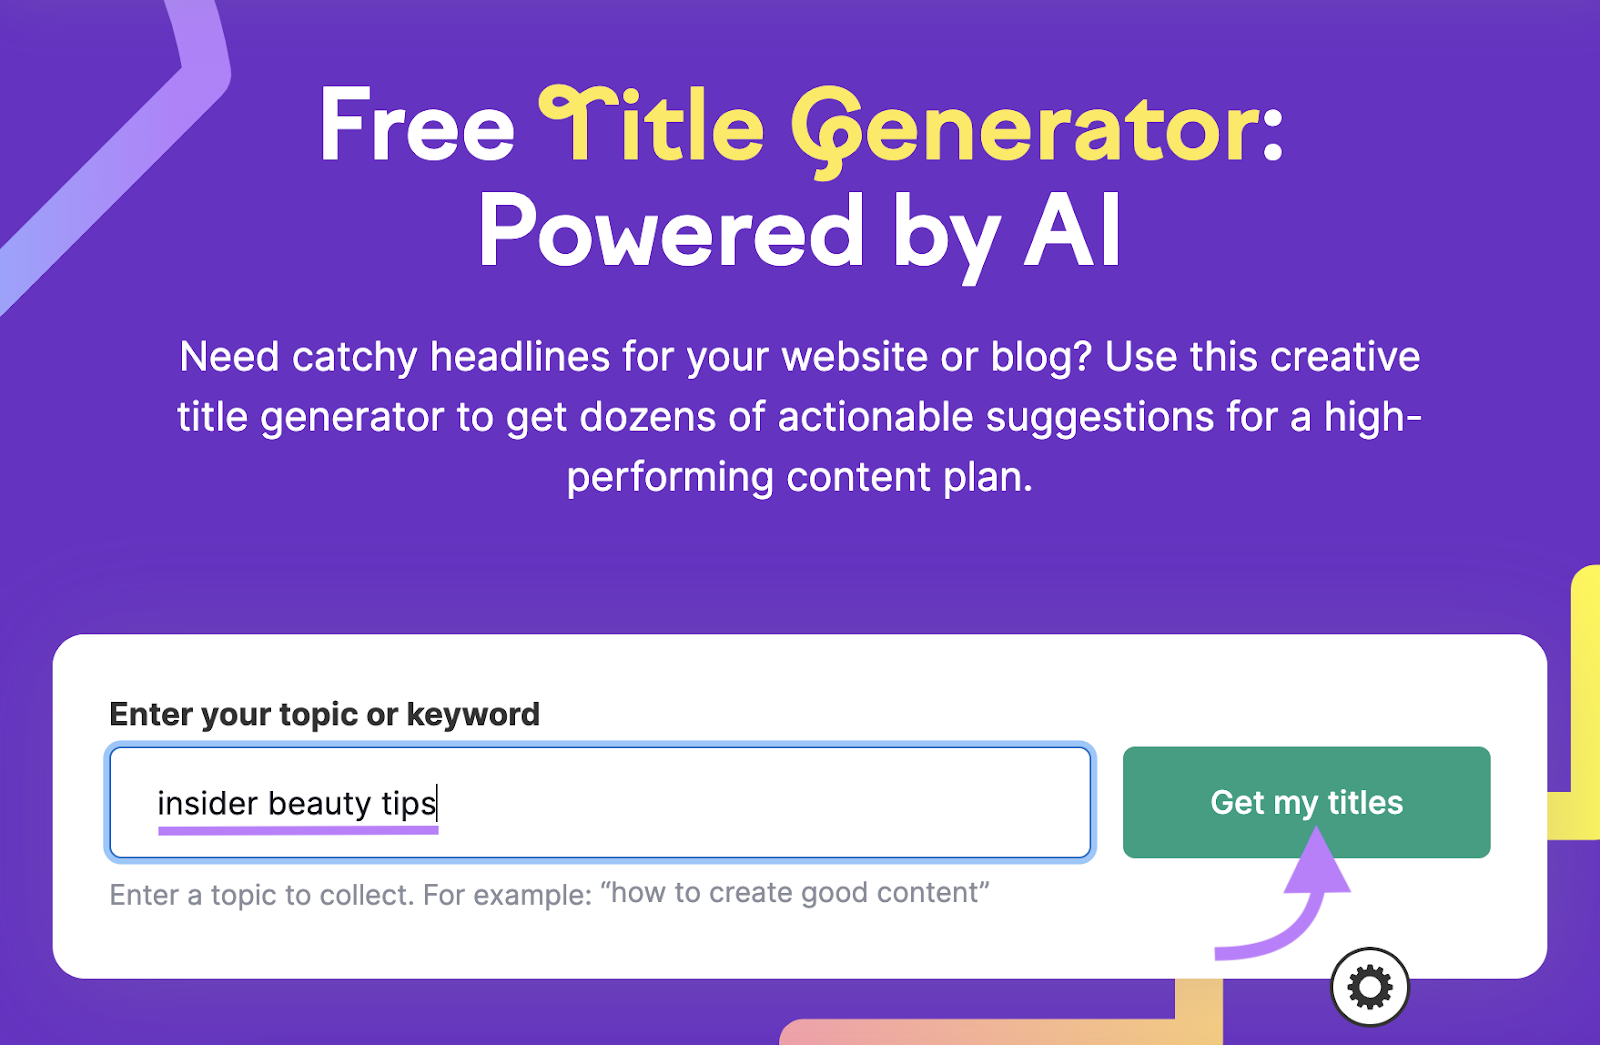 Free Title Generator: Powered by AI tool